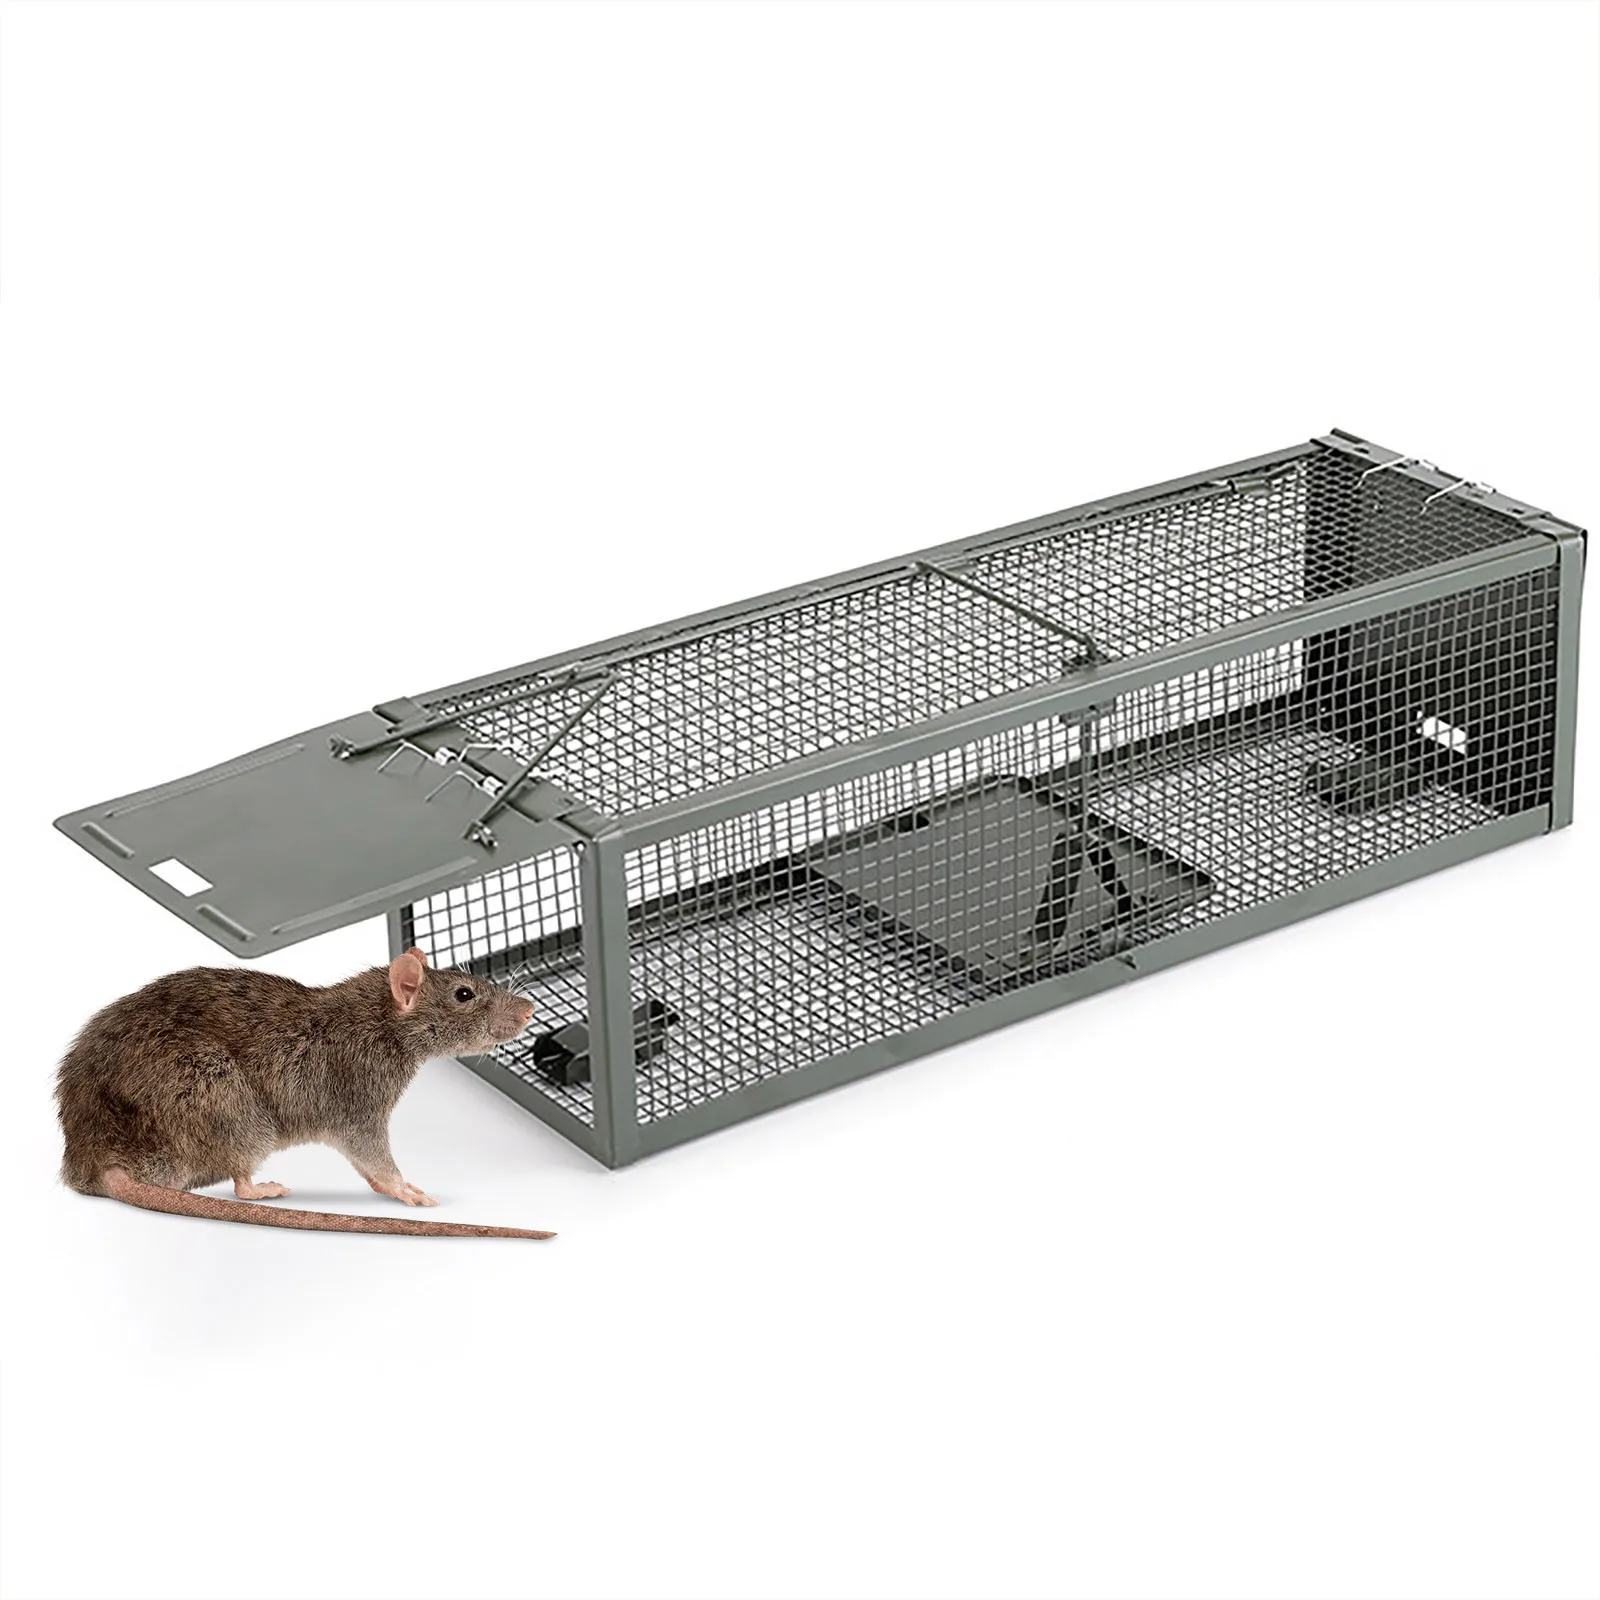 Rodent Animal Mouse Humane Live Trap Hamster Cage Rat Control Catch Bait Outdoor 